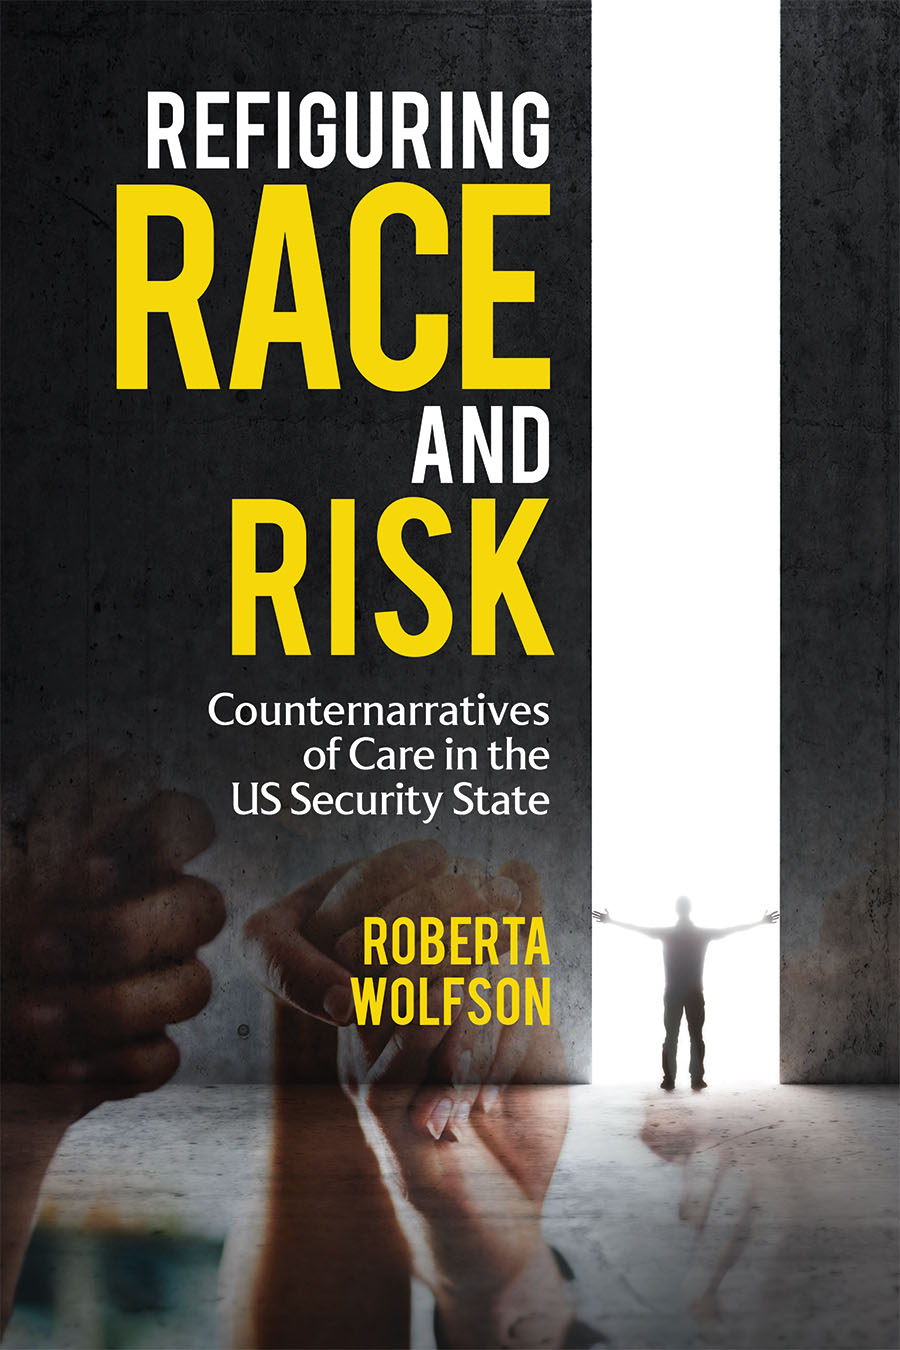 Refiguring Race and Risk: Counternarratives of Care in the US Security State book cover